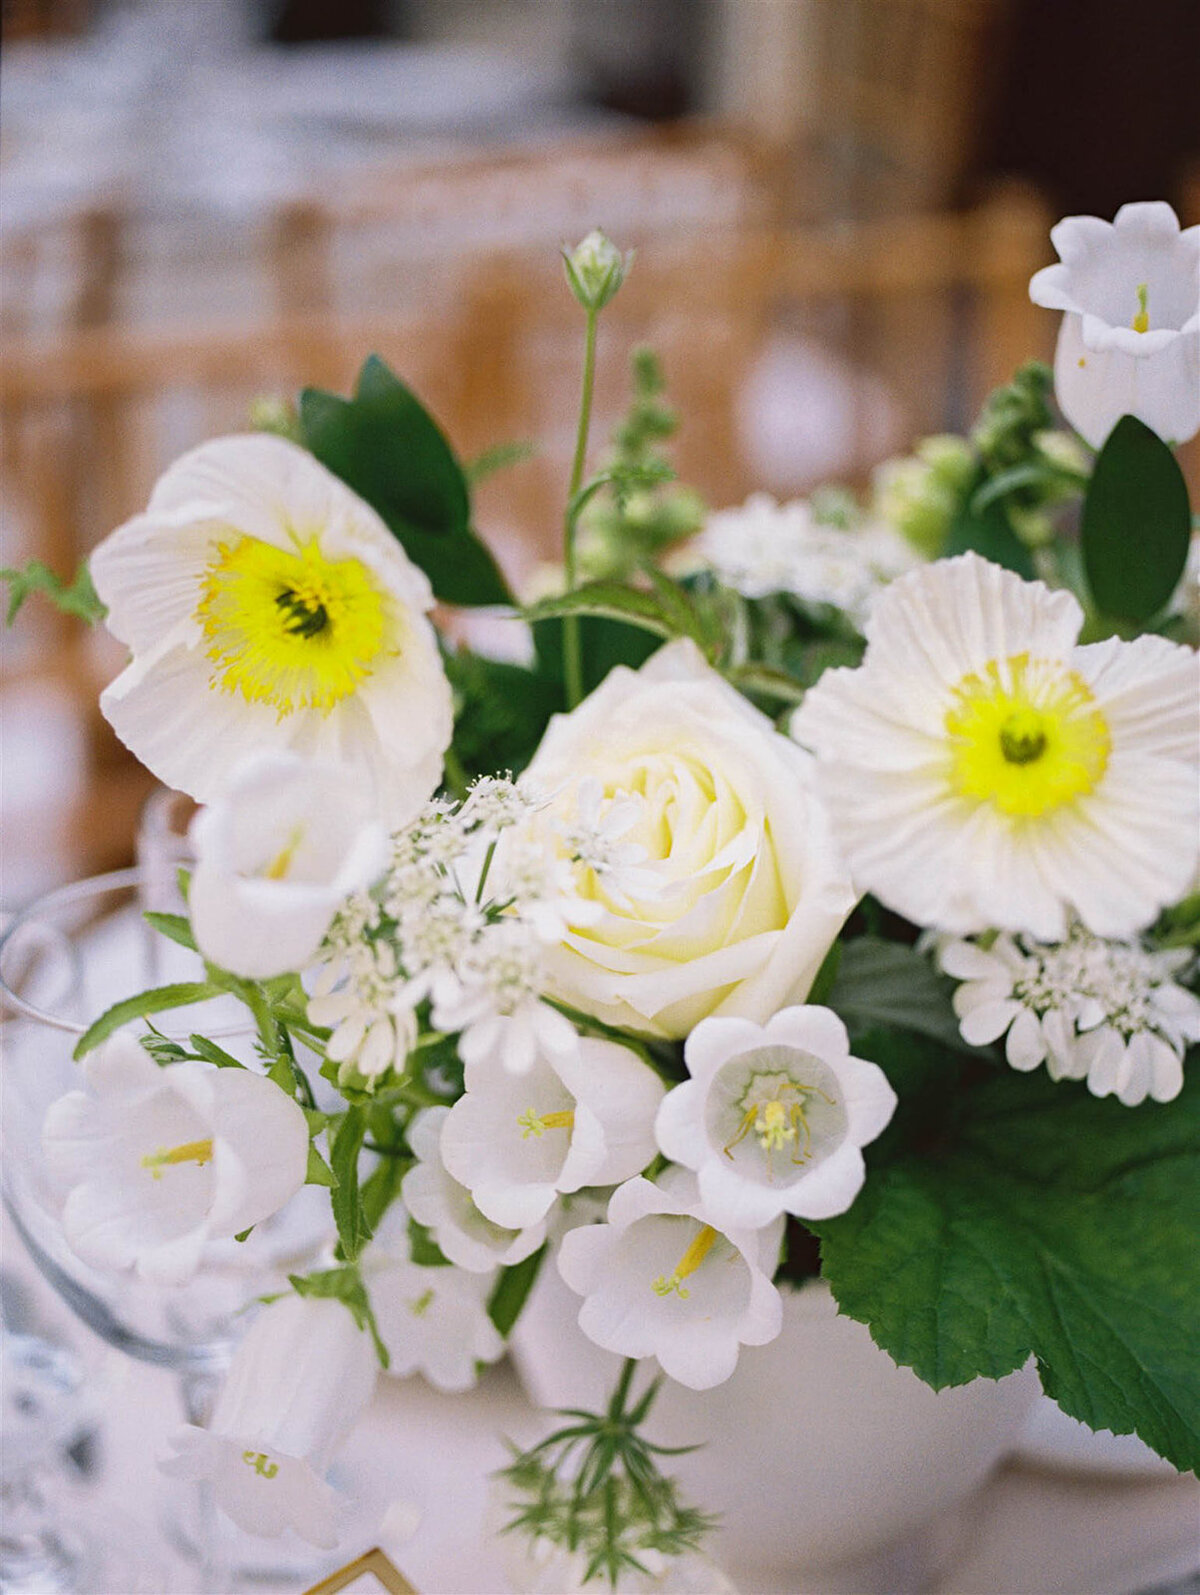 Closeup photo of florals at wedding reception in MIddleburg, Va